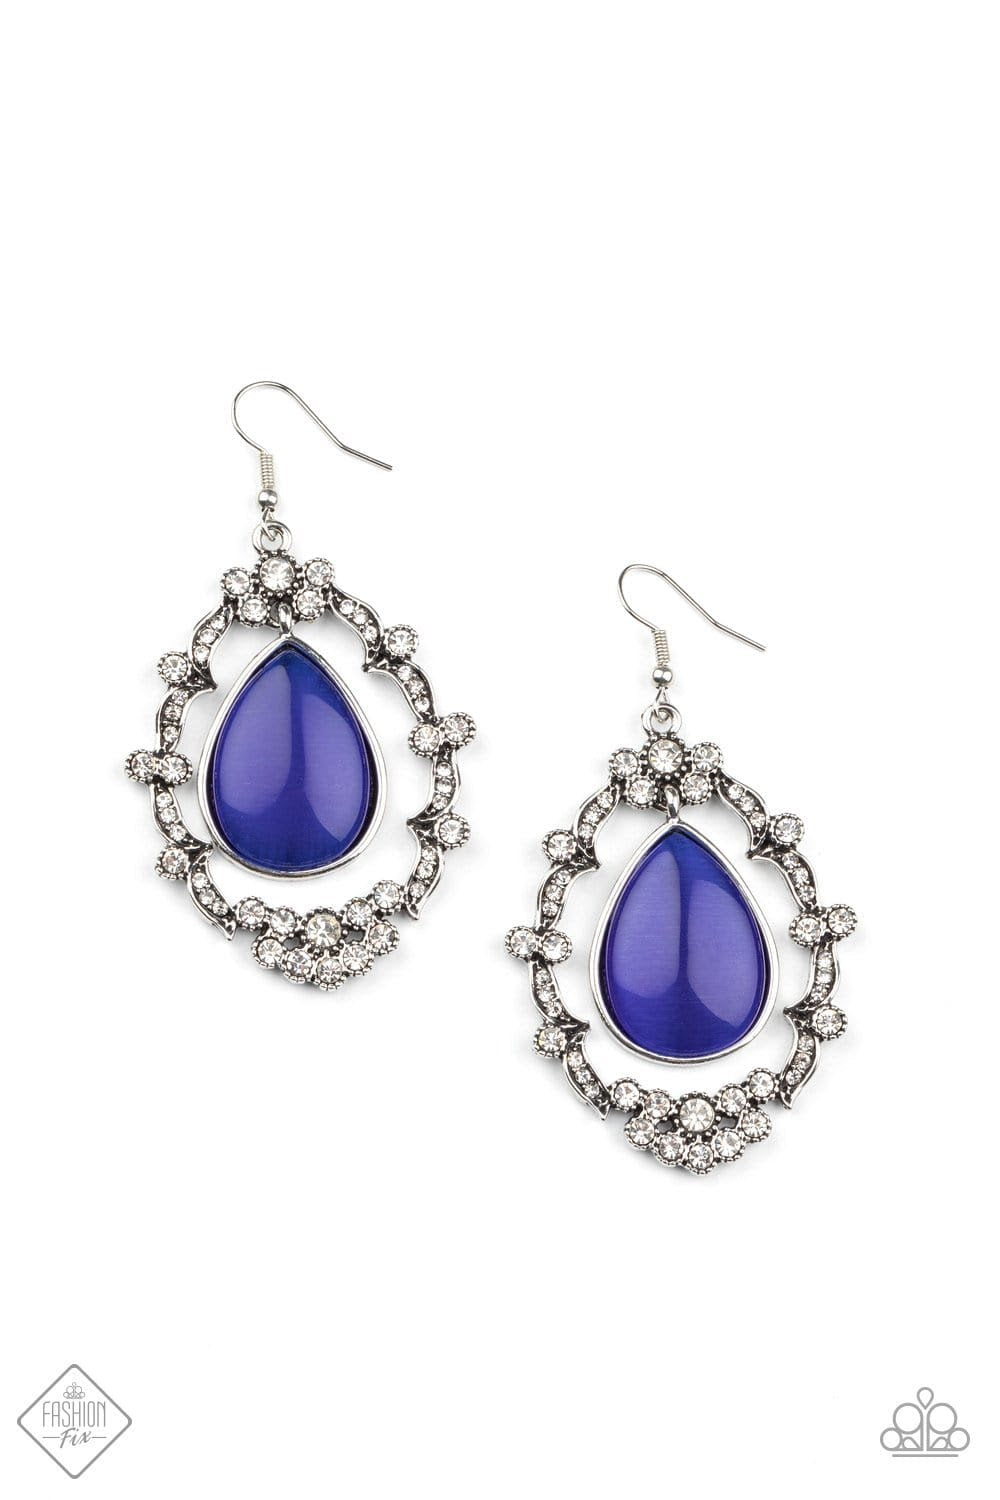 Icy Eden - Blue Teardrop Earrings classic Blue cat's eye teardrop swings from the top of an ornate rhinestone-encrusted frame, creating an icy lure. Earring attaches to a standard fishhook fitting.  Sold as one pair of earrings.